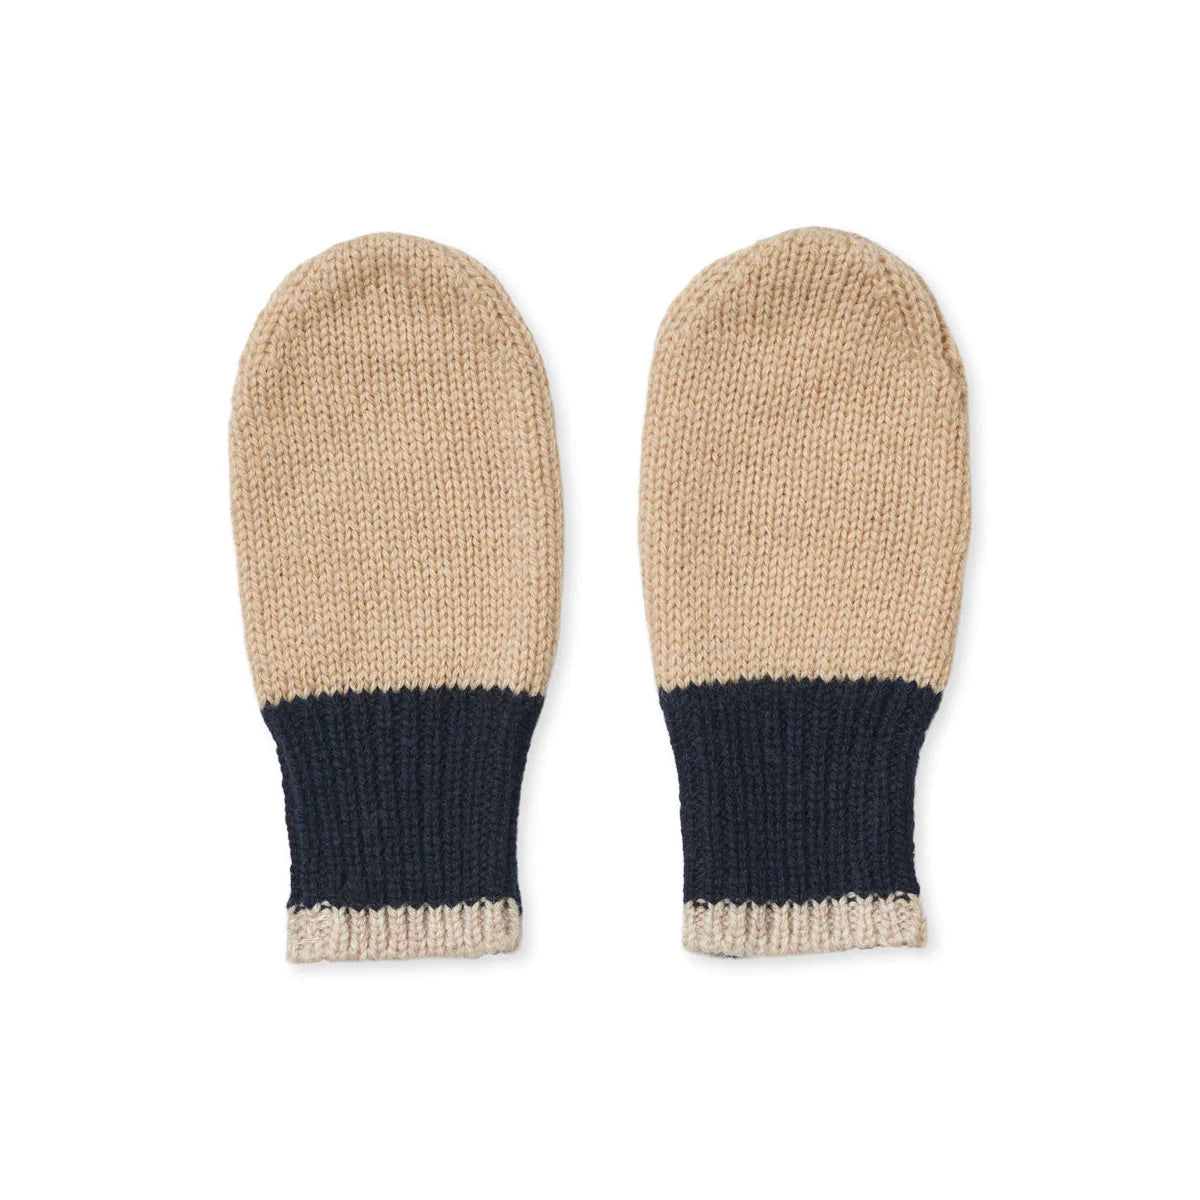 Liewood Pipi mittens Fausthandschuhe oat beige